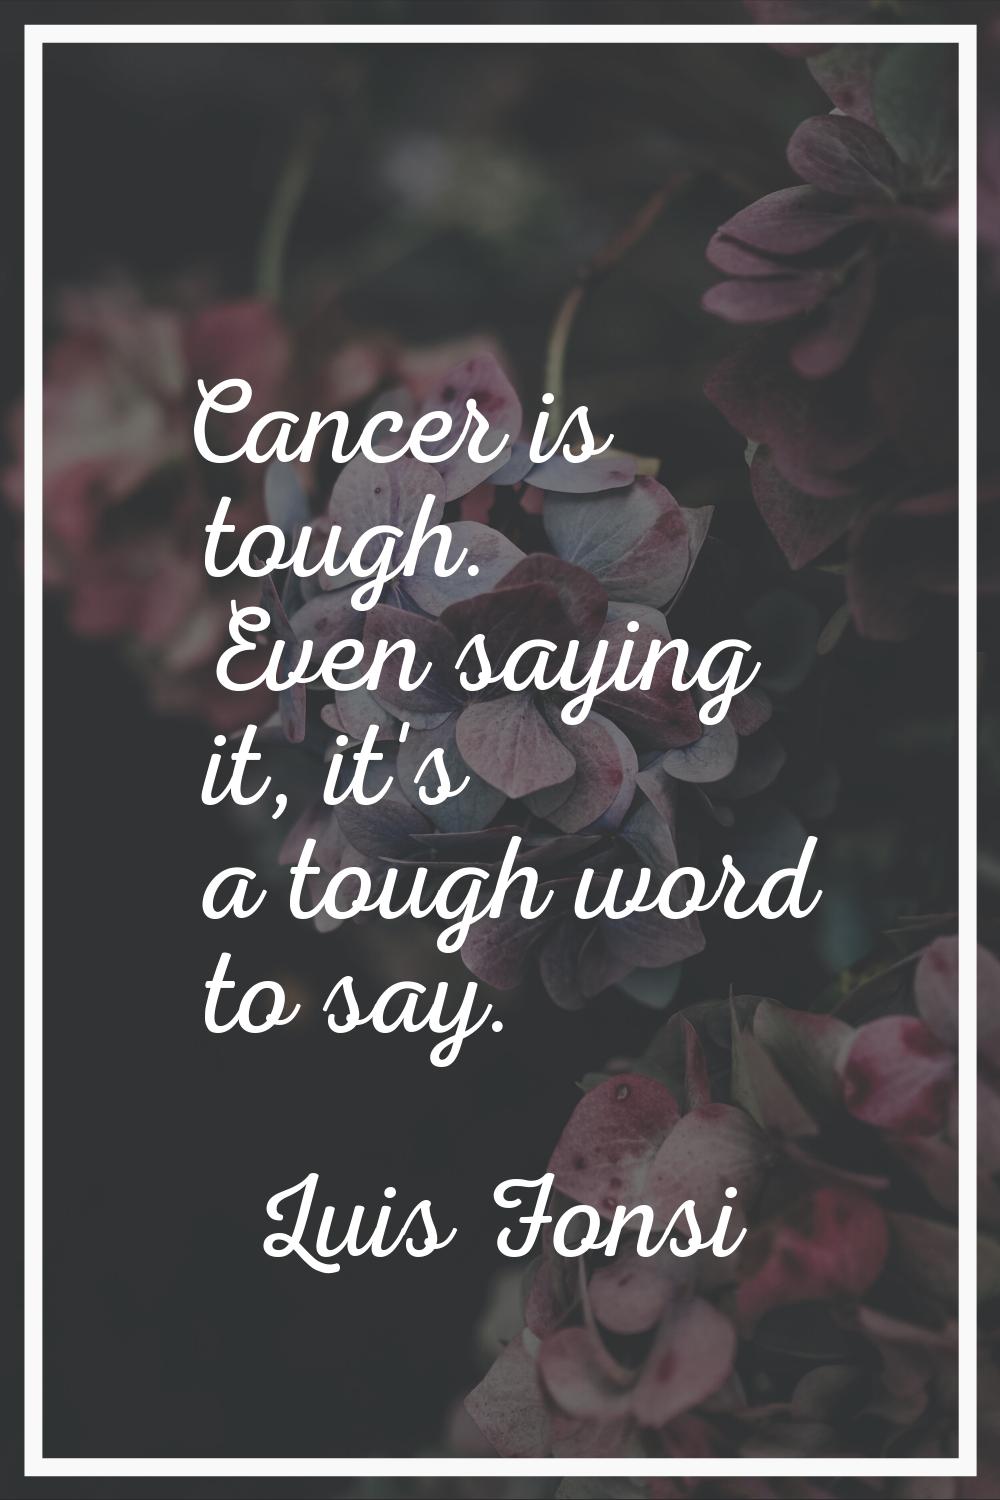 Cancer is tough. Even saying it, it's a tough word to say.